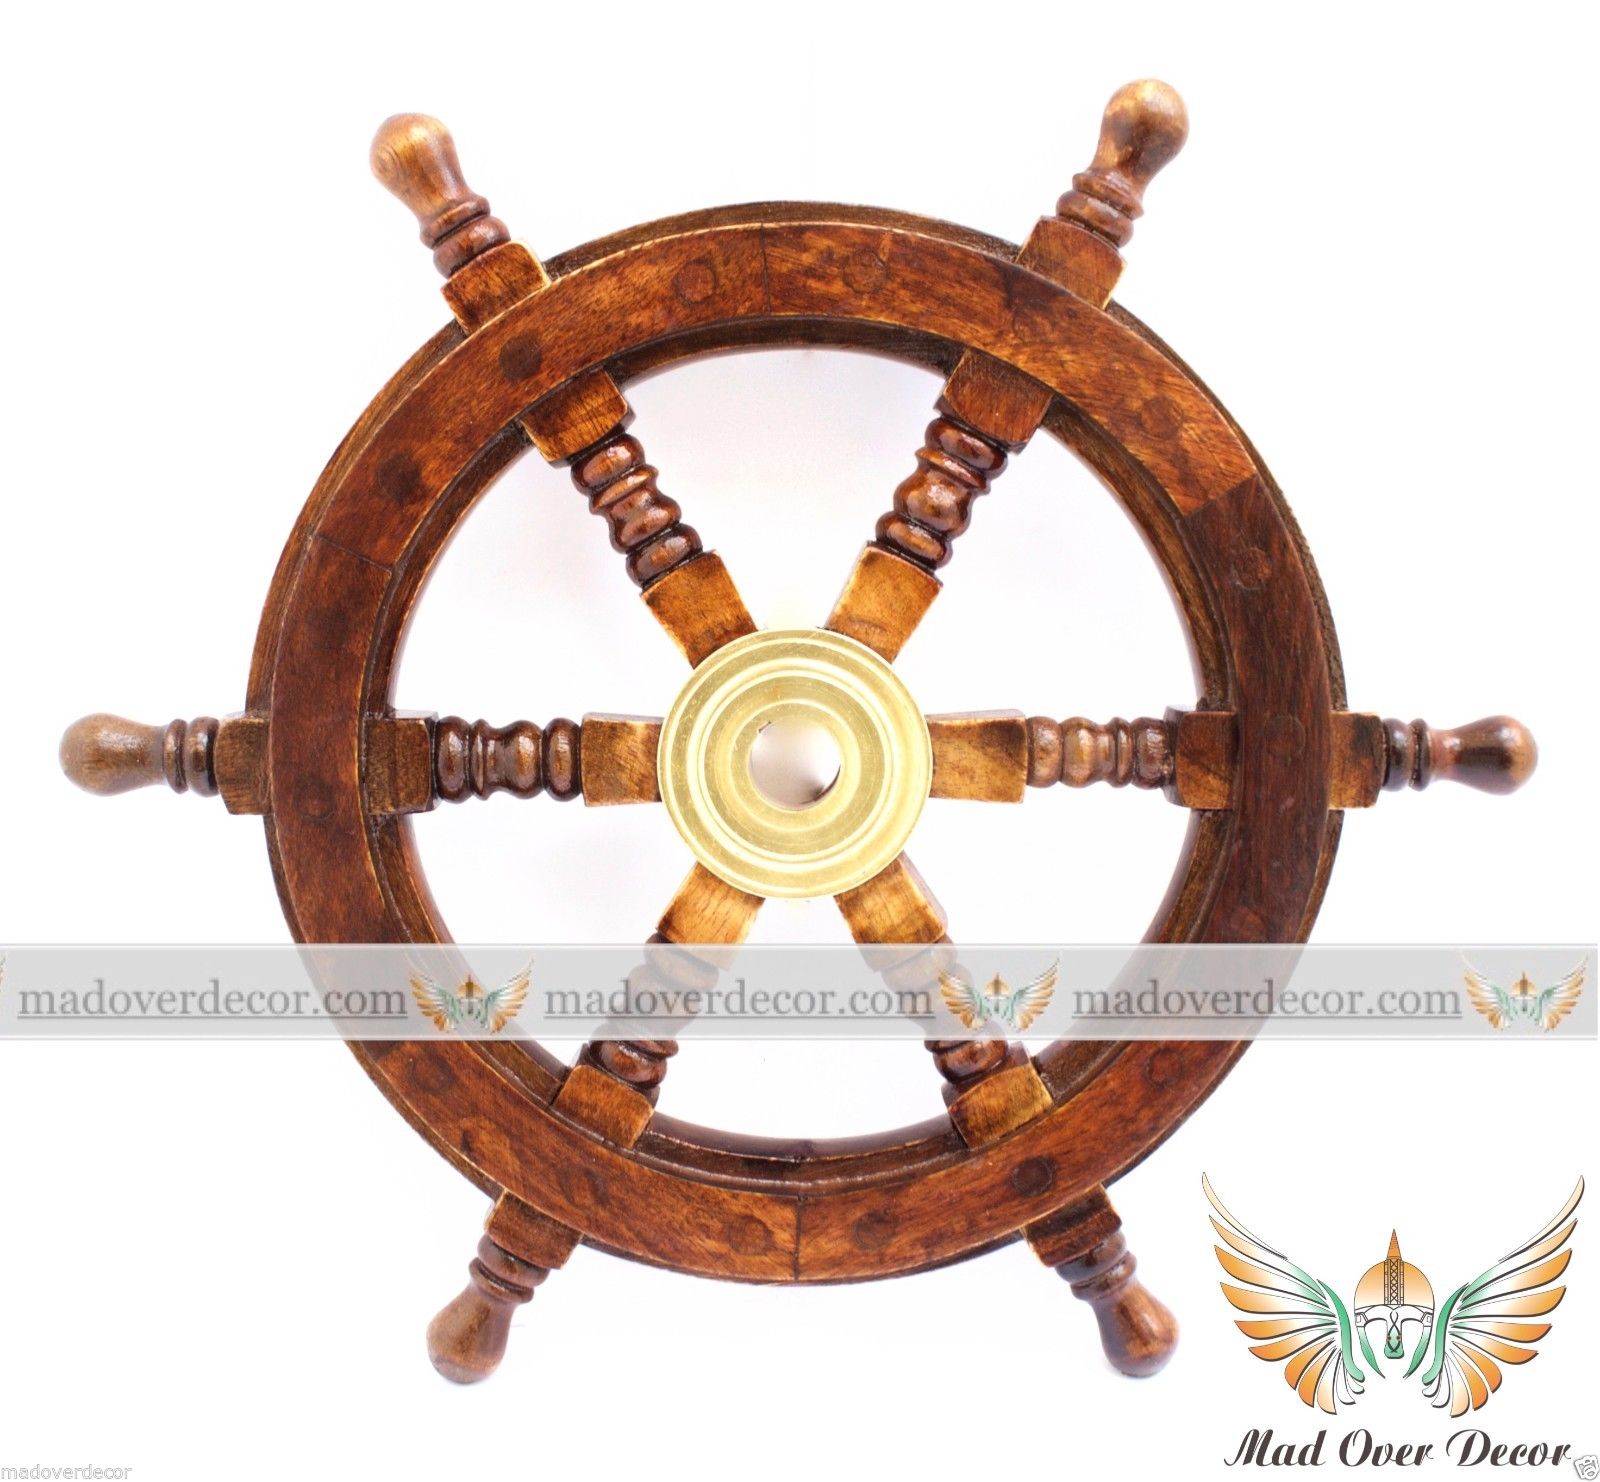 NAUTICAL WOODEN SHIP STEERING WHEEL PIRATE DECOR WOOD BRASS WALL BOAT CAPTAIN